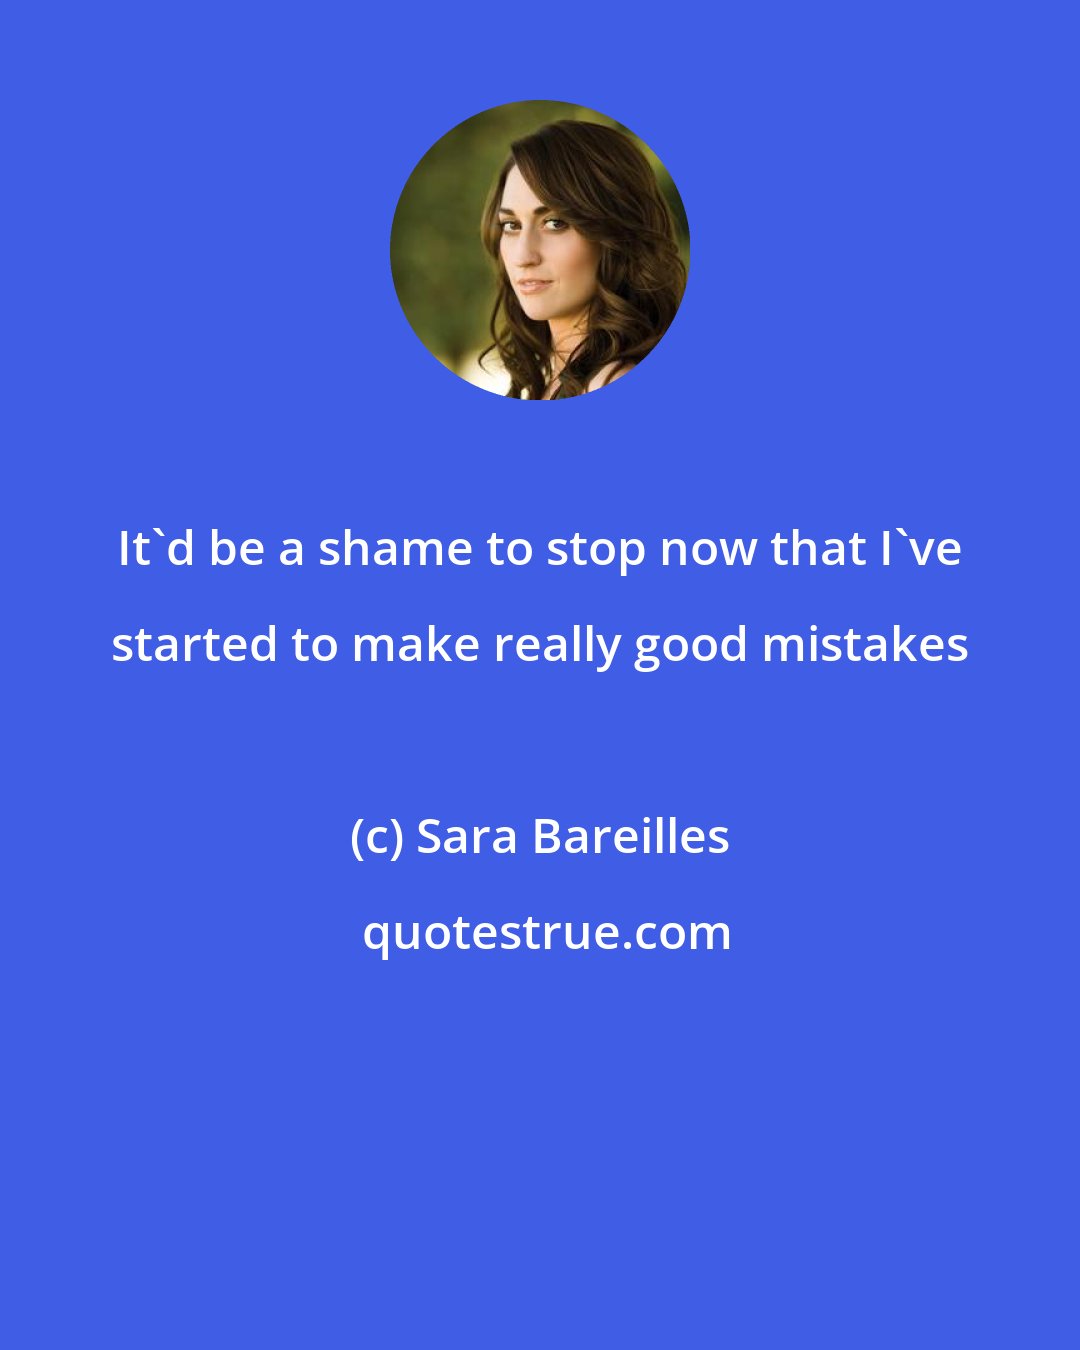 Sara Bareilles: It'd be a shame to stop now that I've started to make really good mistakes